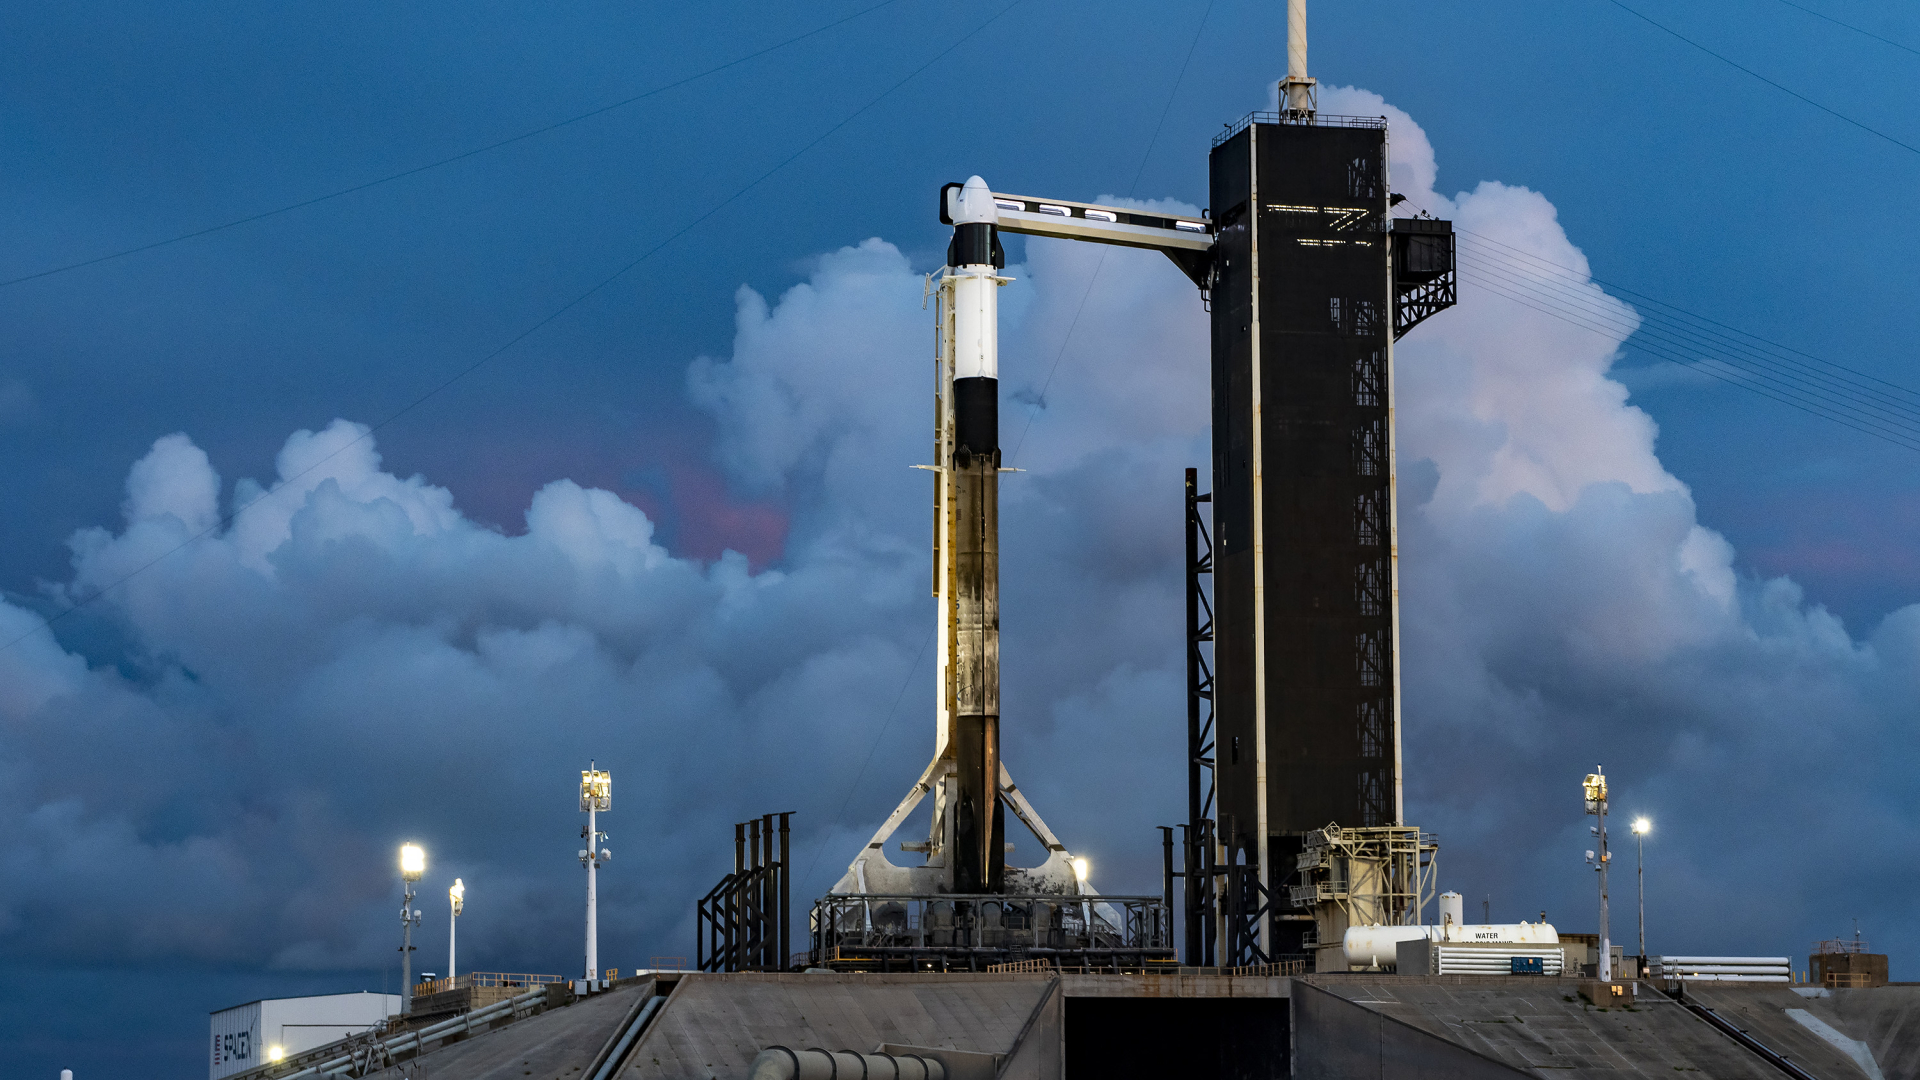 A black and white SpaceX rocket on launch pad with menacing dark clouds in the background